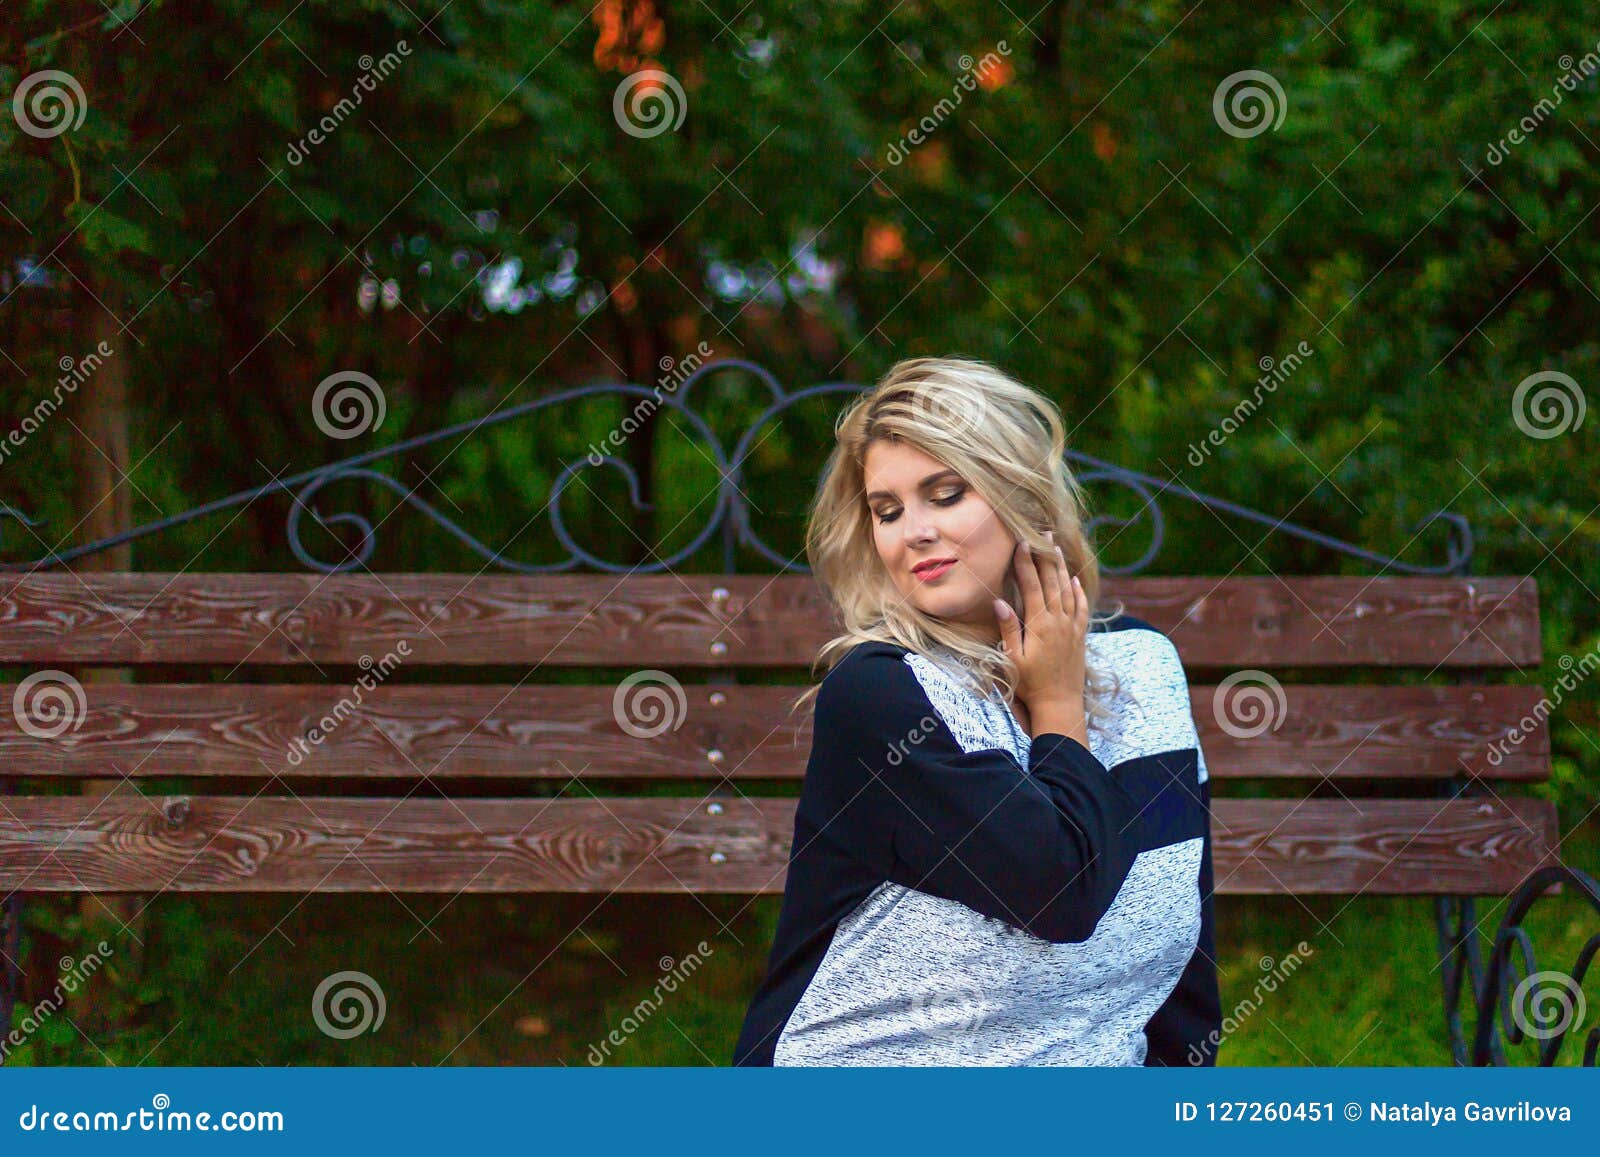 Fat Girl with a Beautiful Smile Stock Image - Image of blond, fashion ...